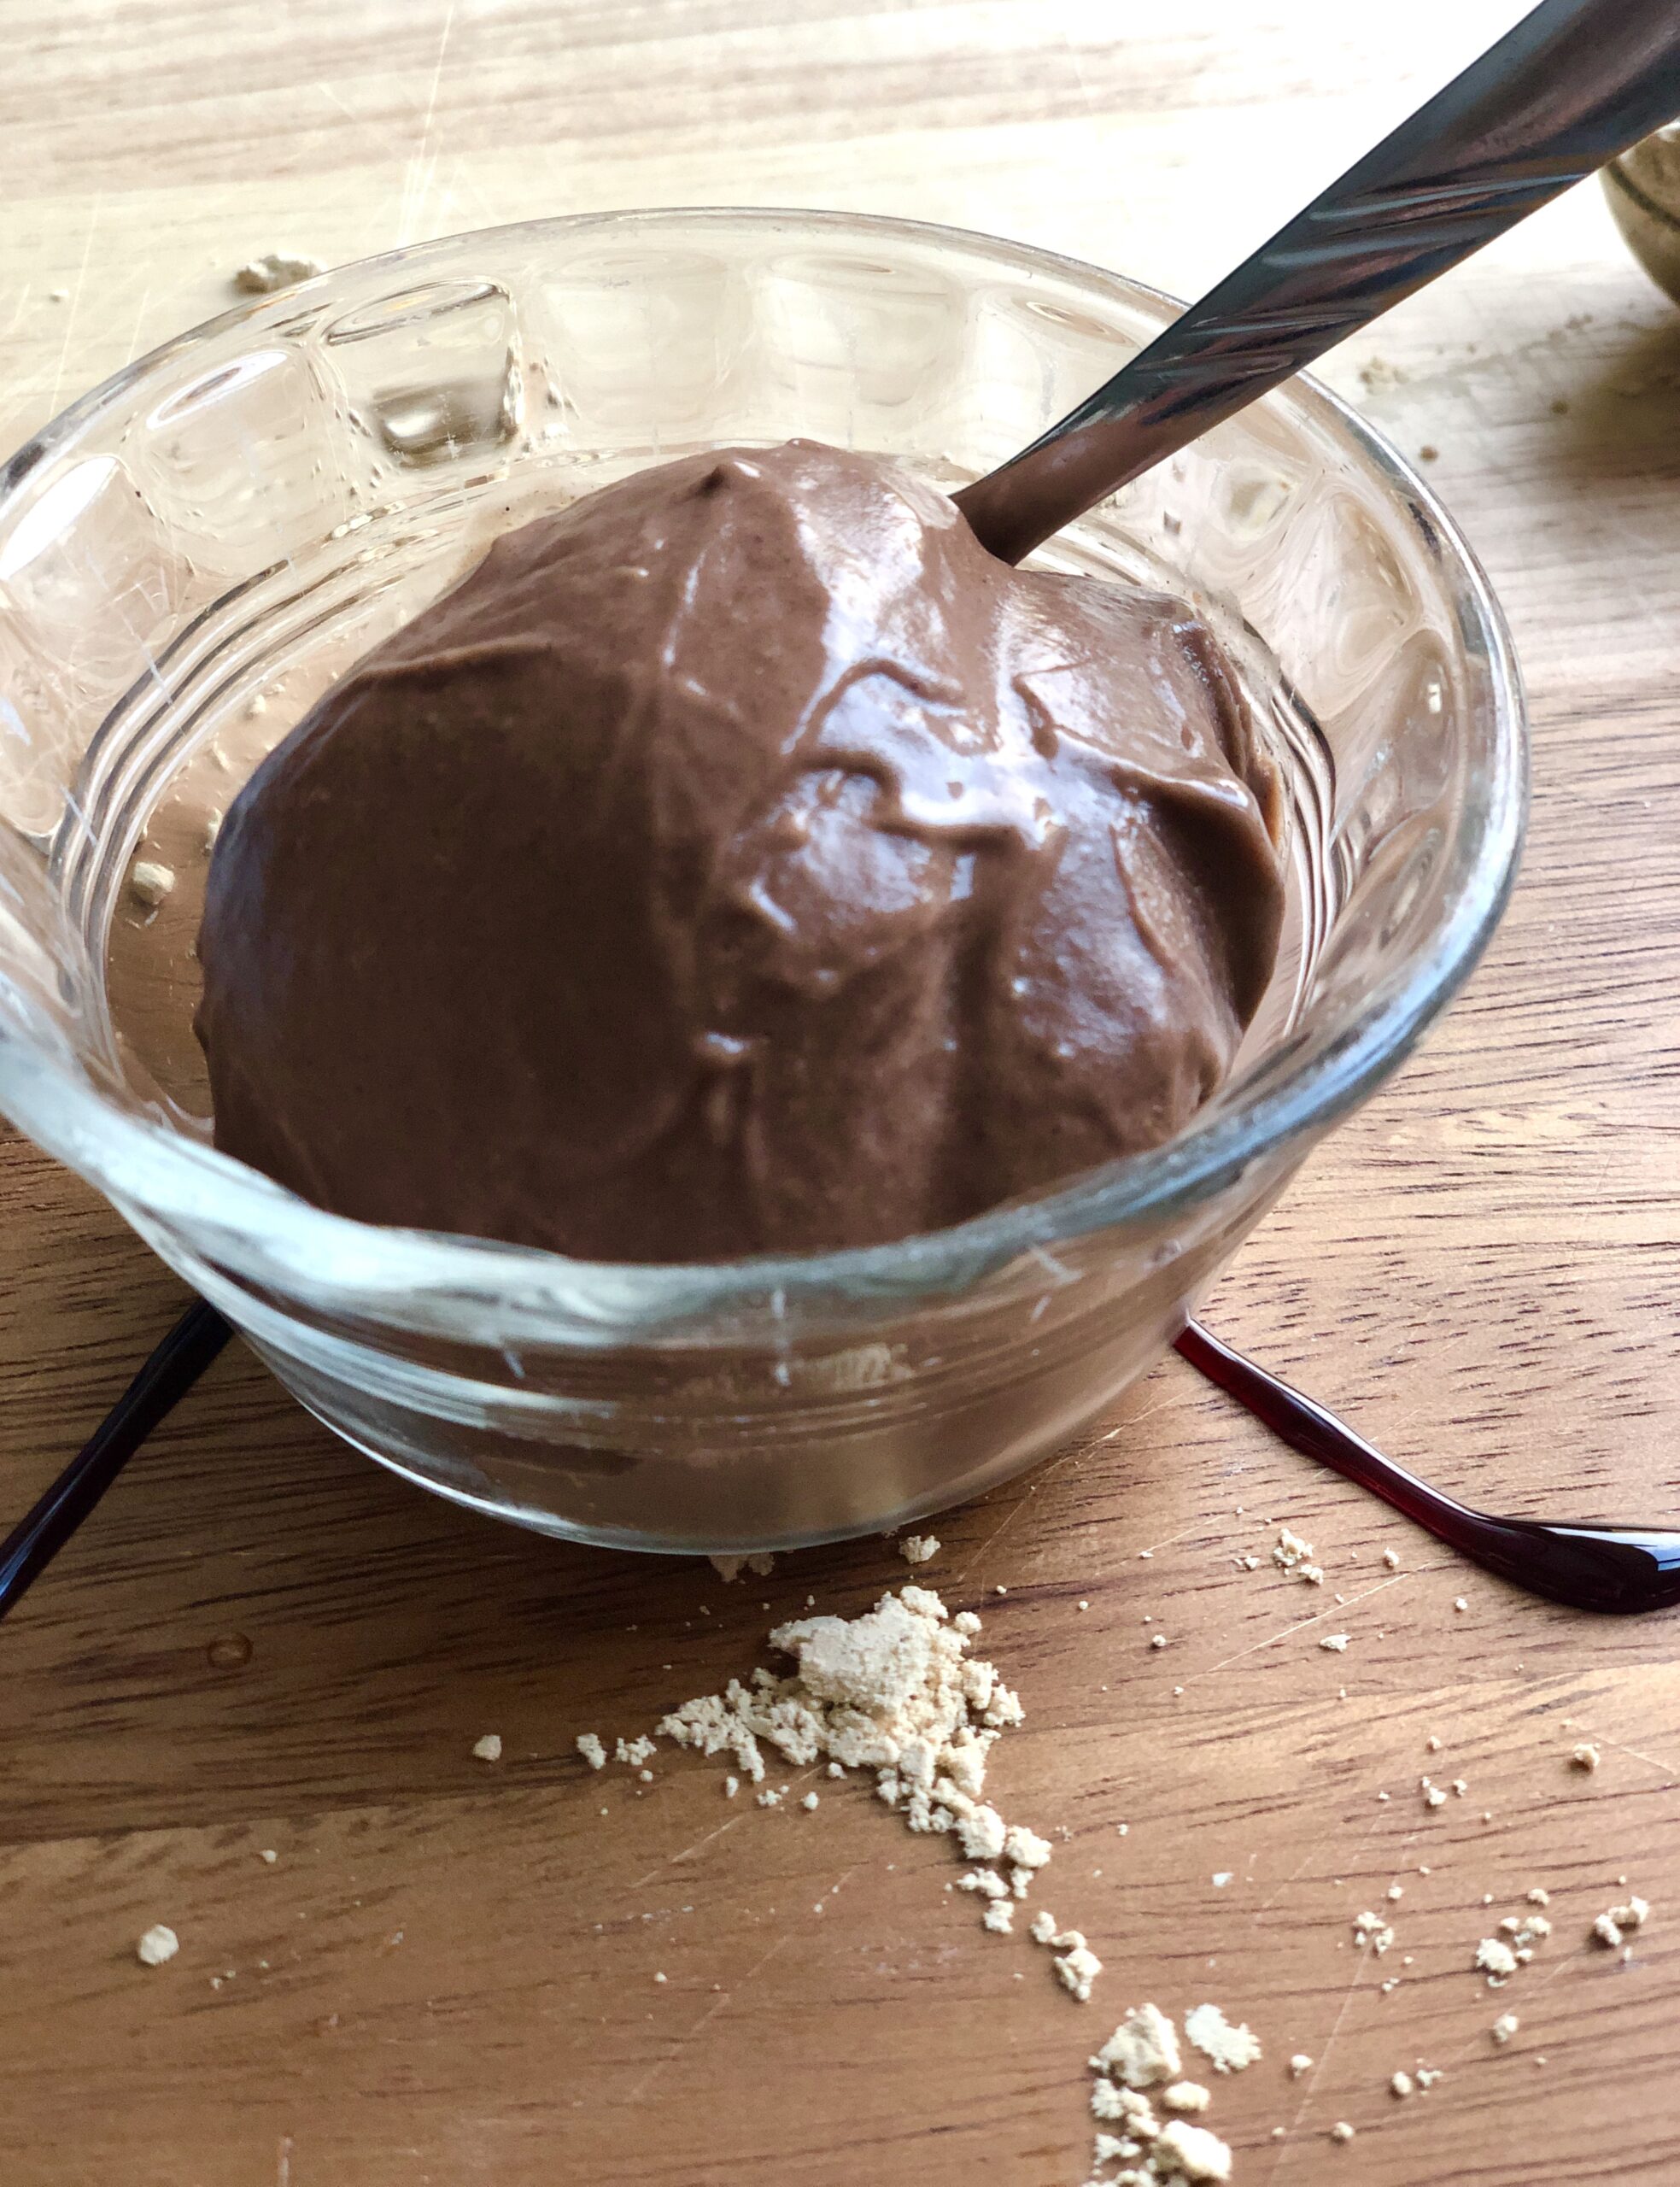 A small bowl of chocolate peanut butter ice cream. There is a spoon in the bowl and peanut butter powder scattered around the bowl.